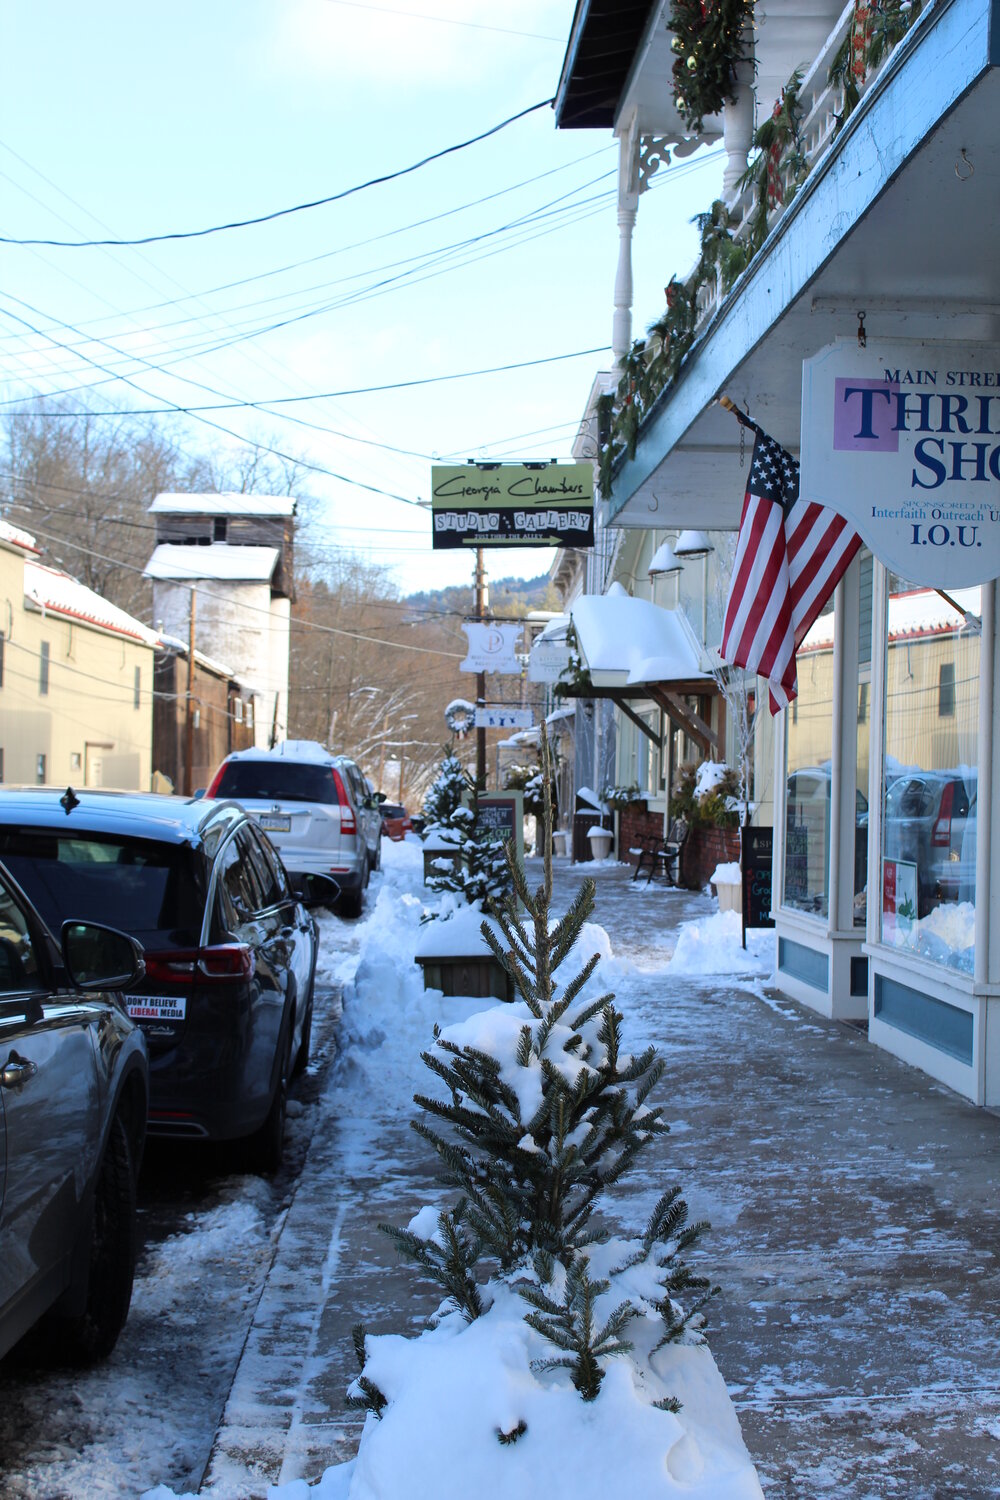 The holiday season in Callicoon offers something for everyone.